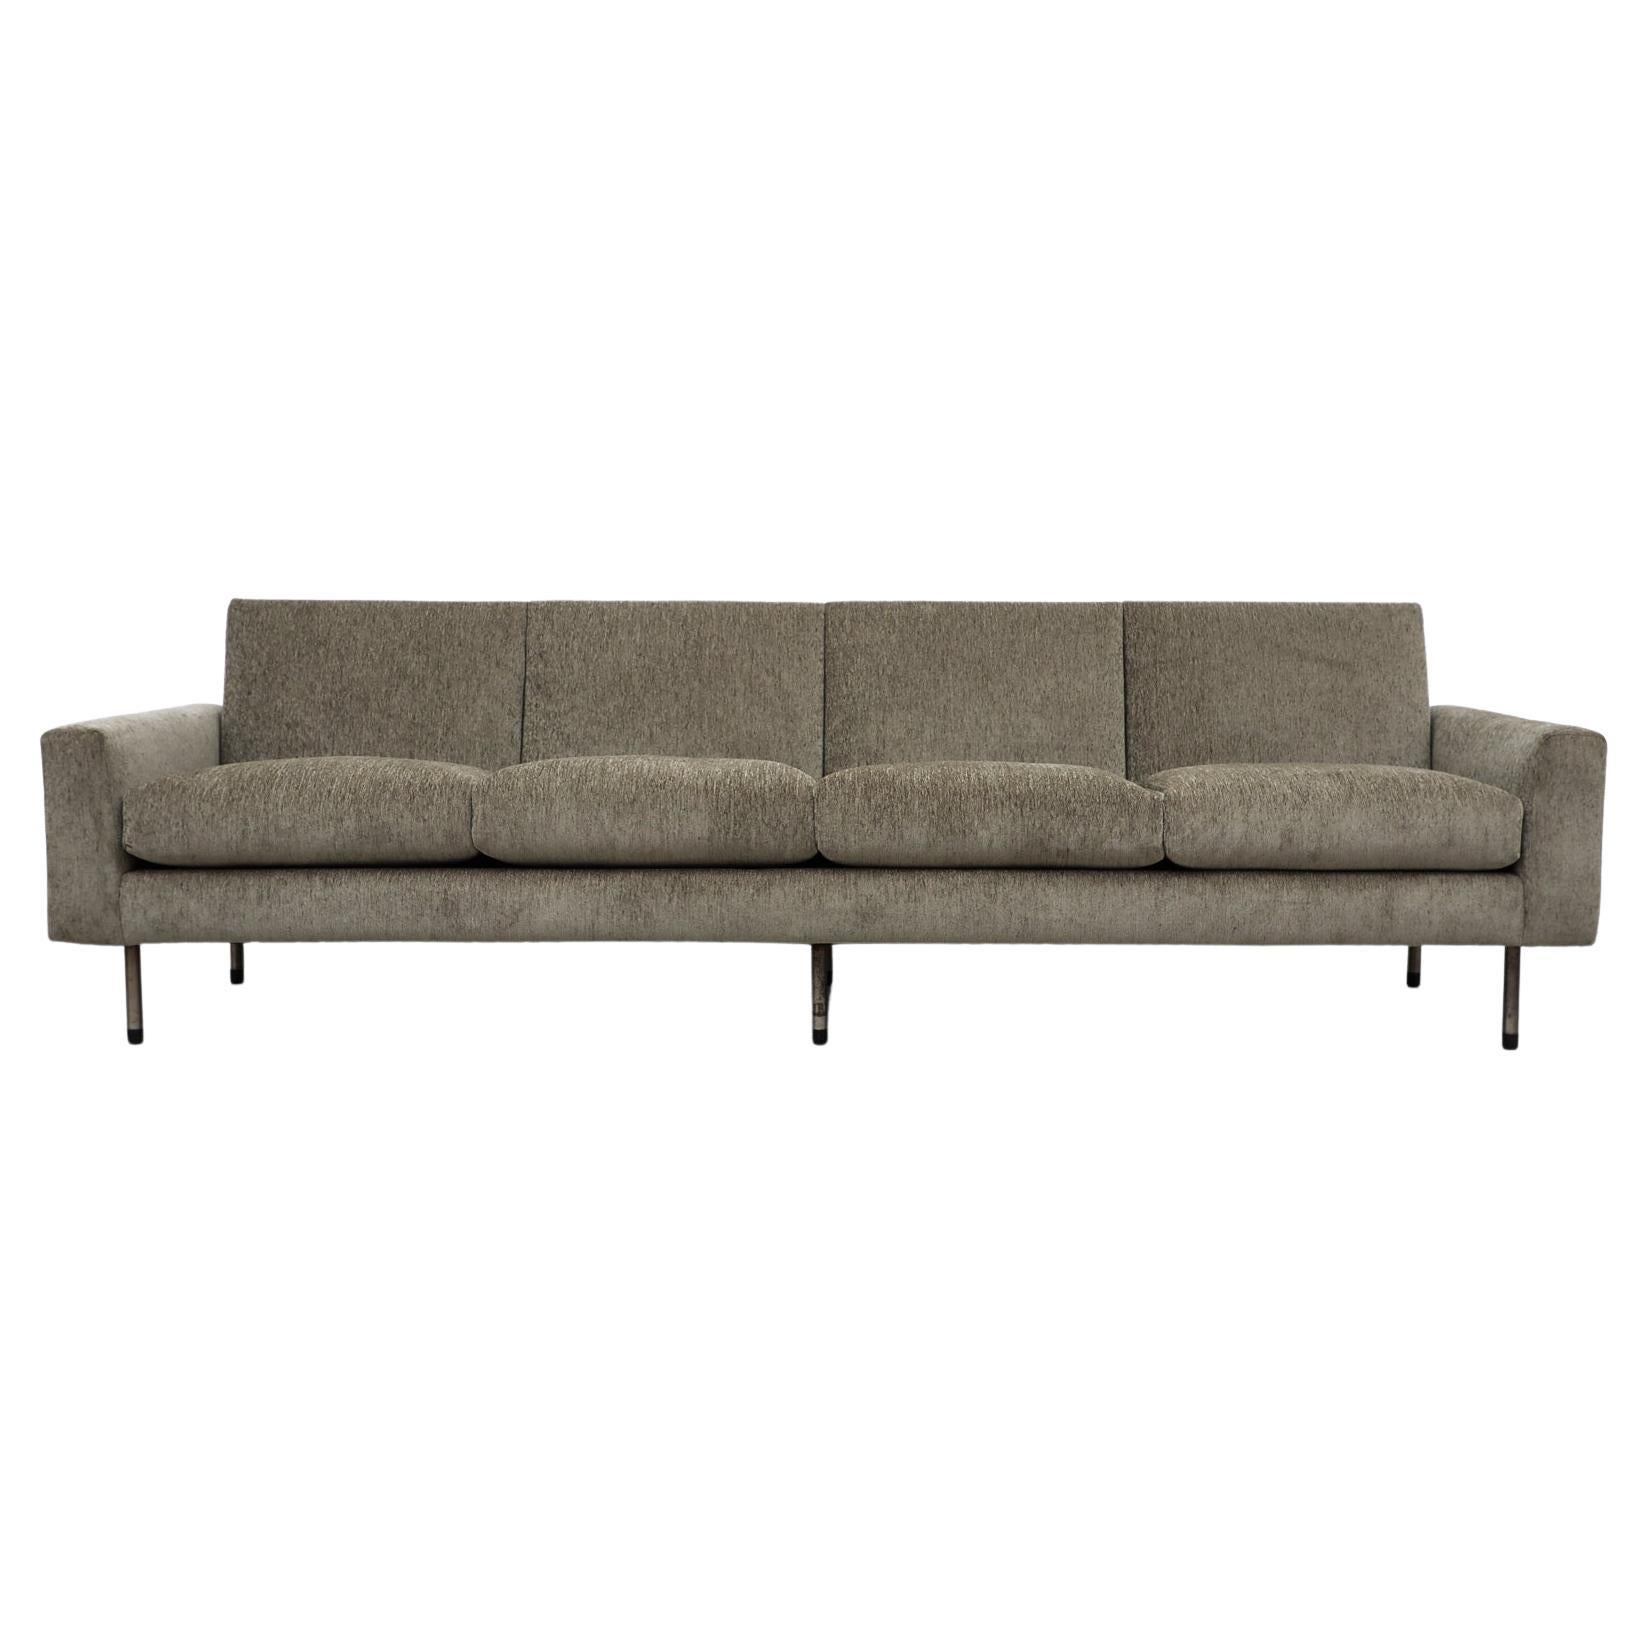 Extra Long Gelderland 4 Seater Sofa by Rob Parry